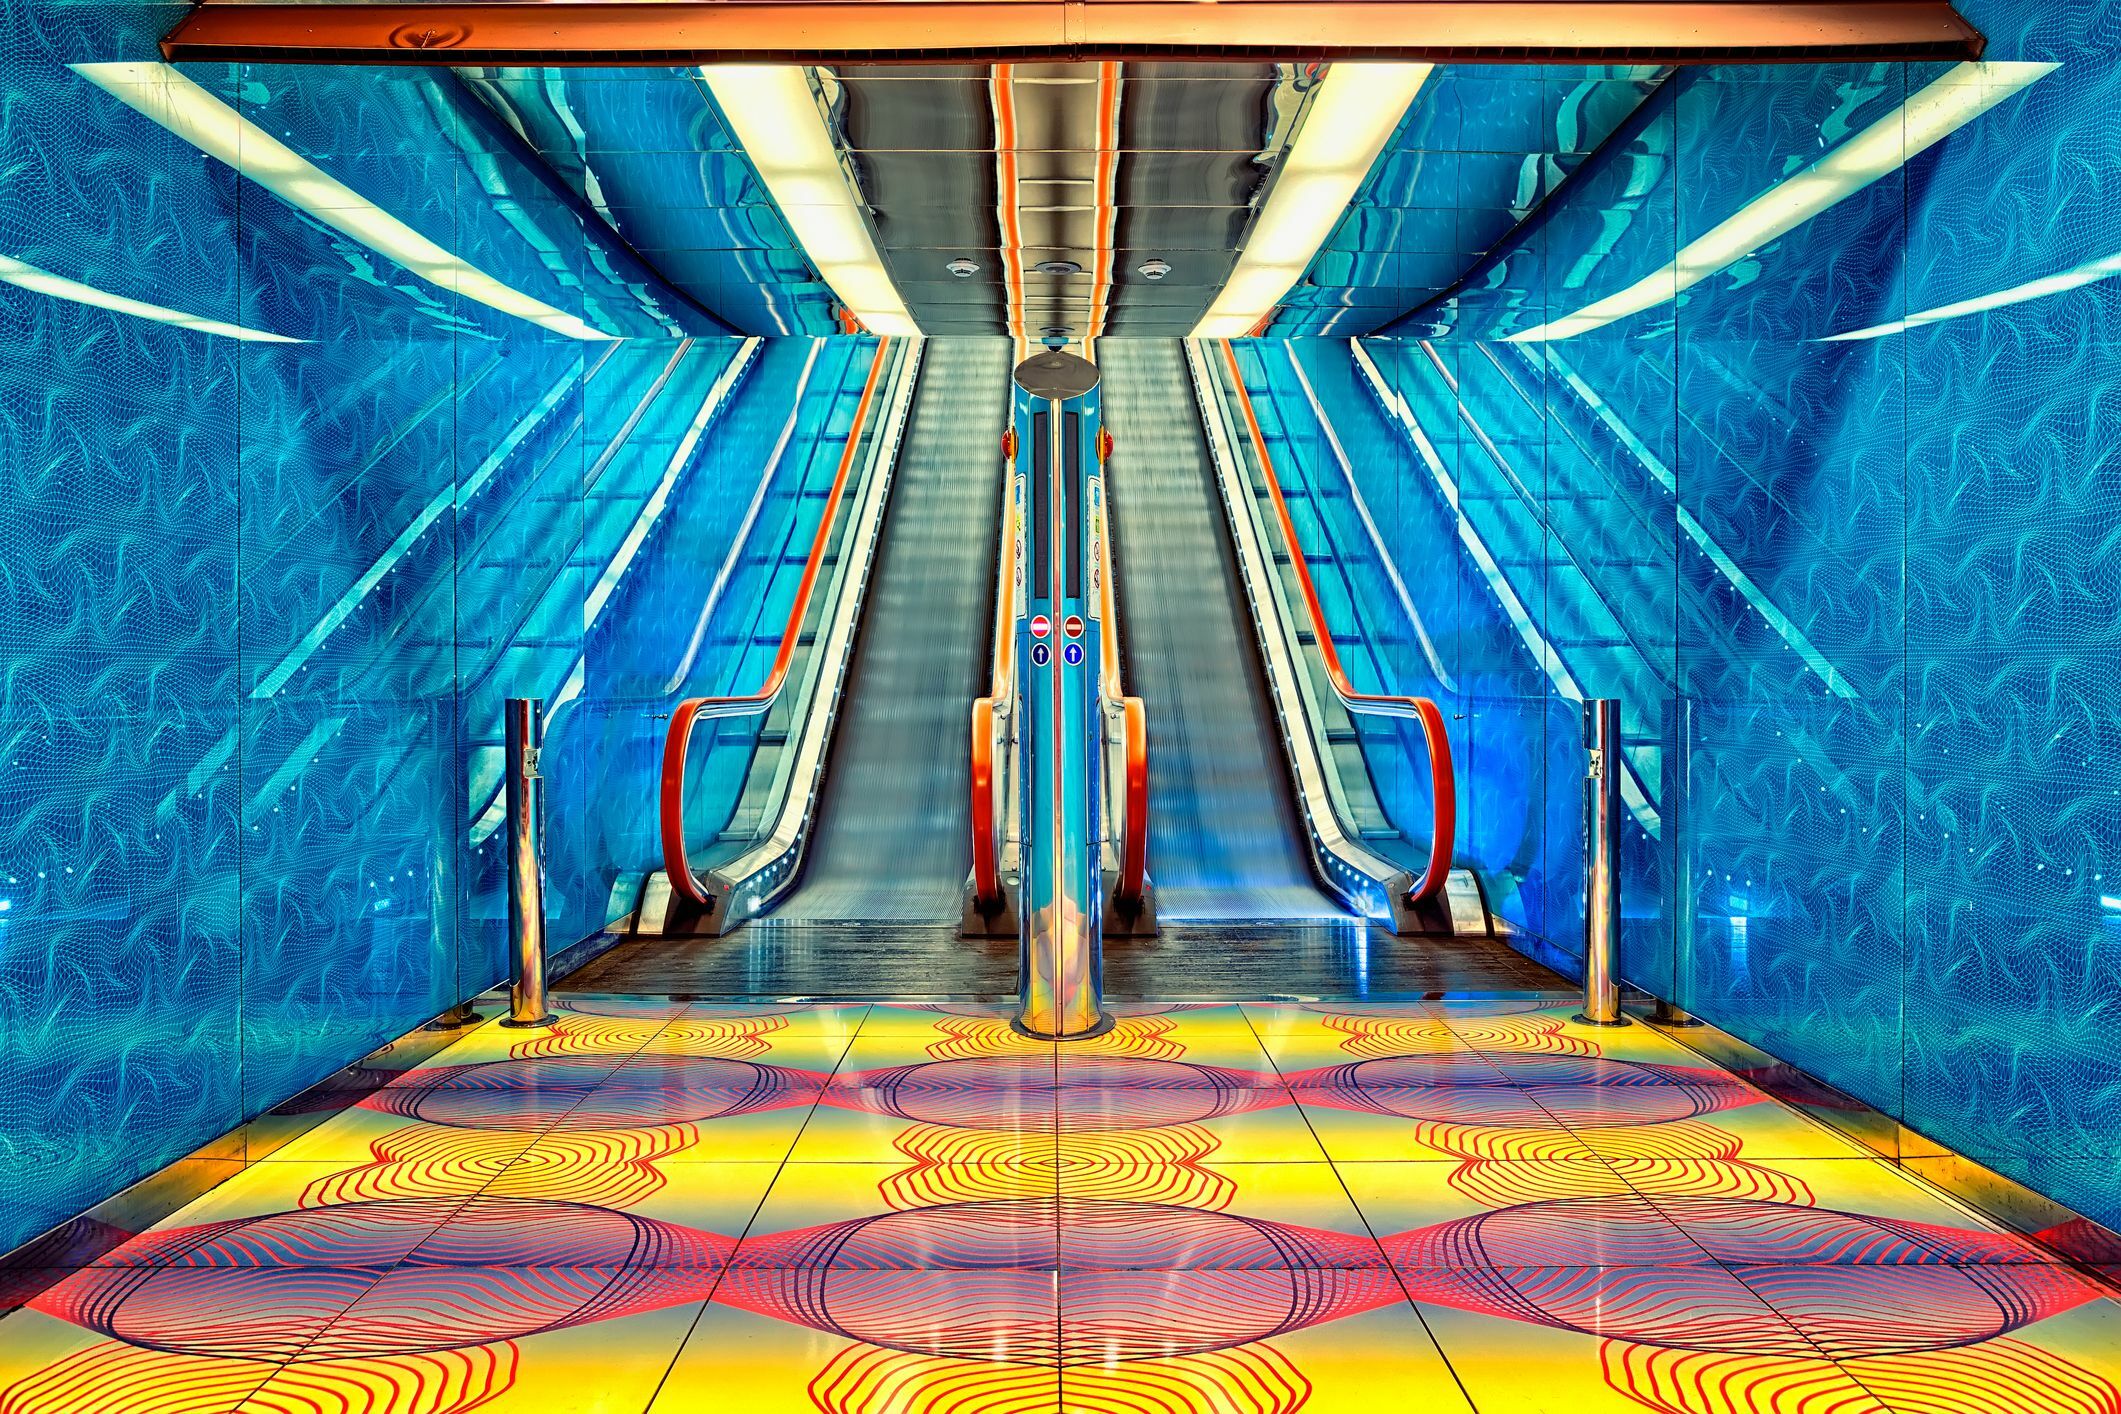 Futuristic and modern naples subway station royalty free image 497297937 1561629338